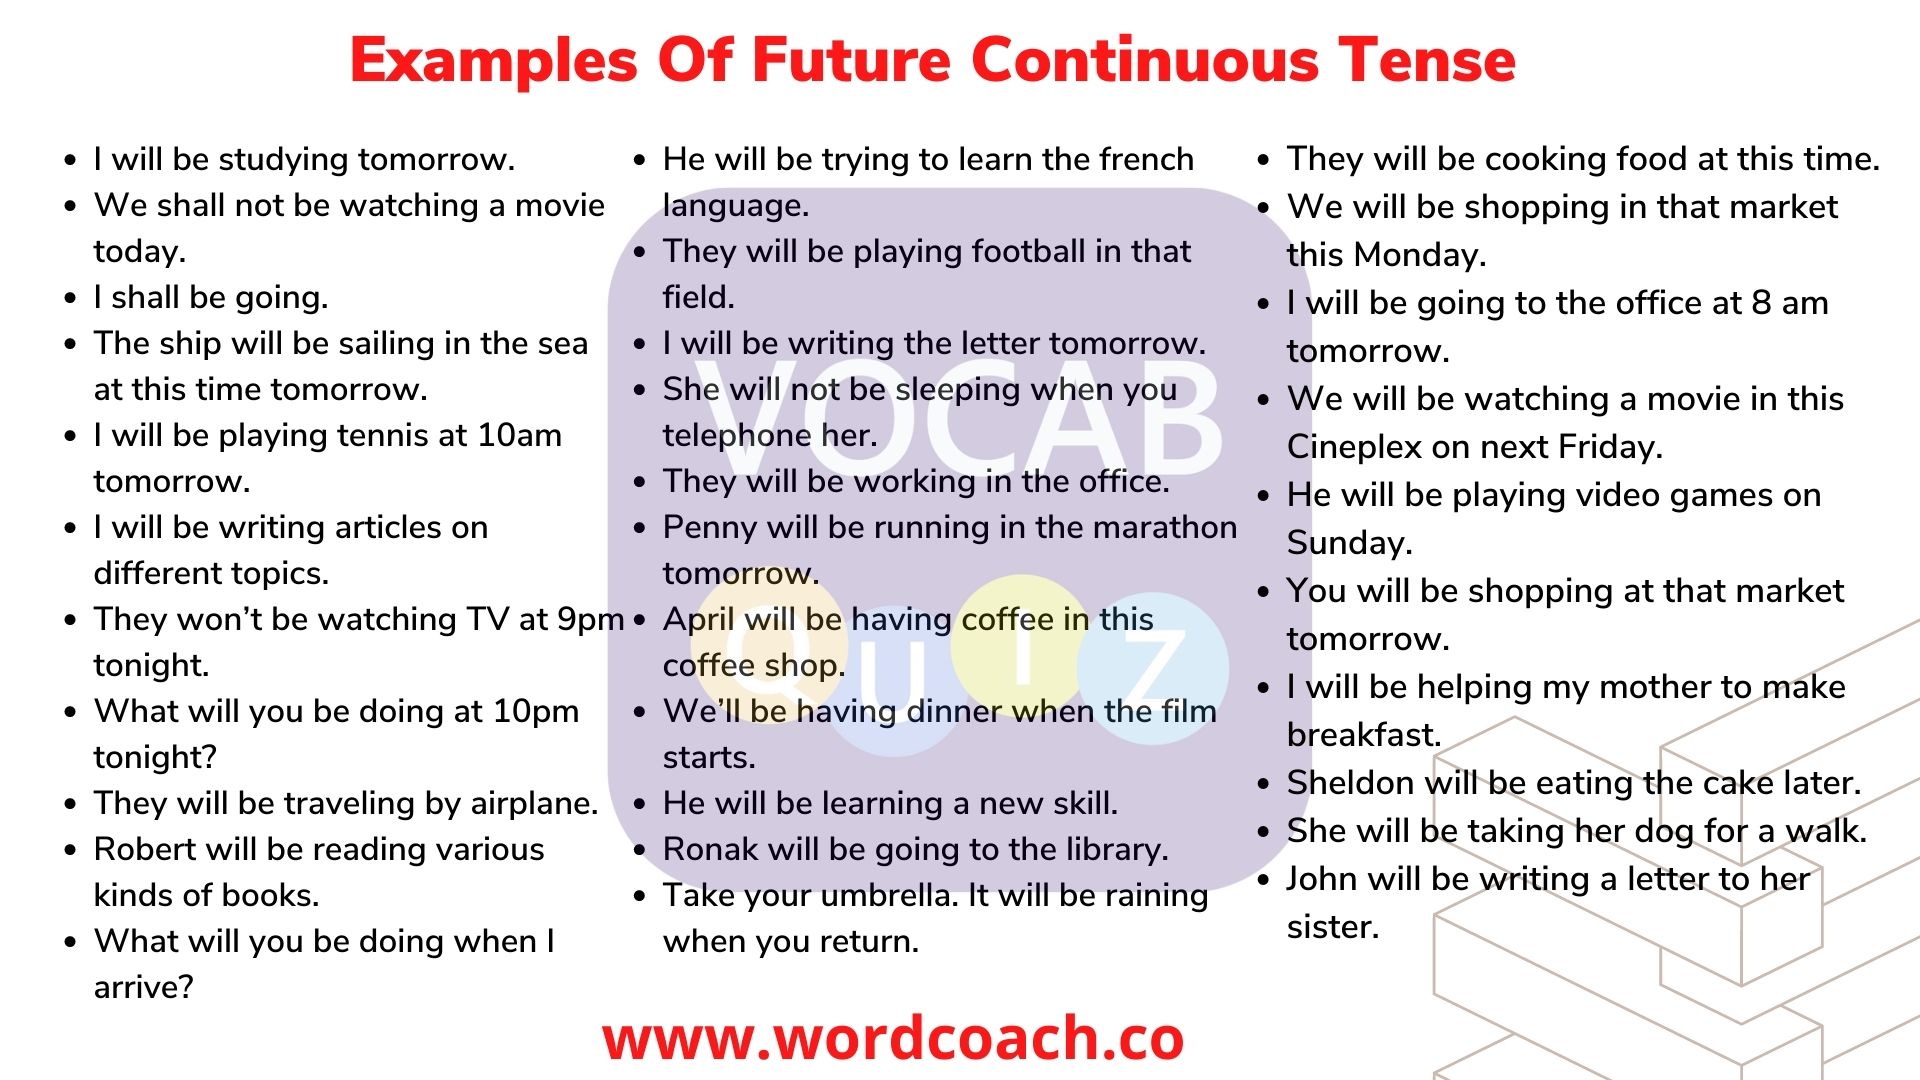 Examples Of Future Continuous Tense - wordcoach.co